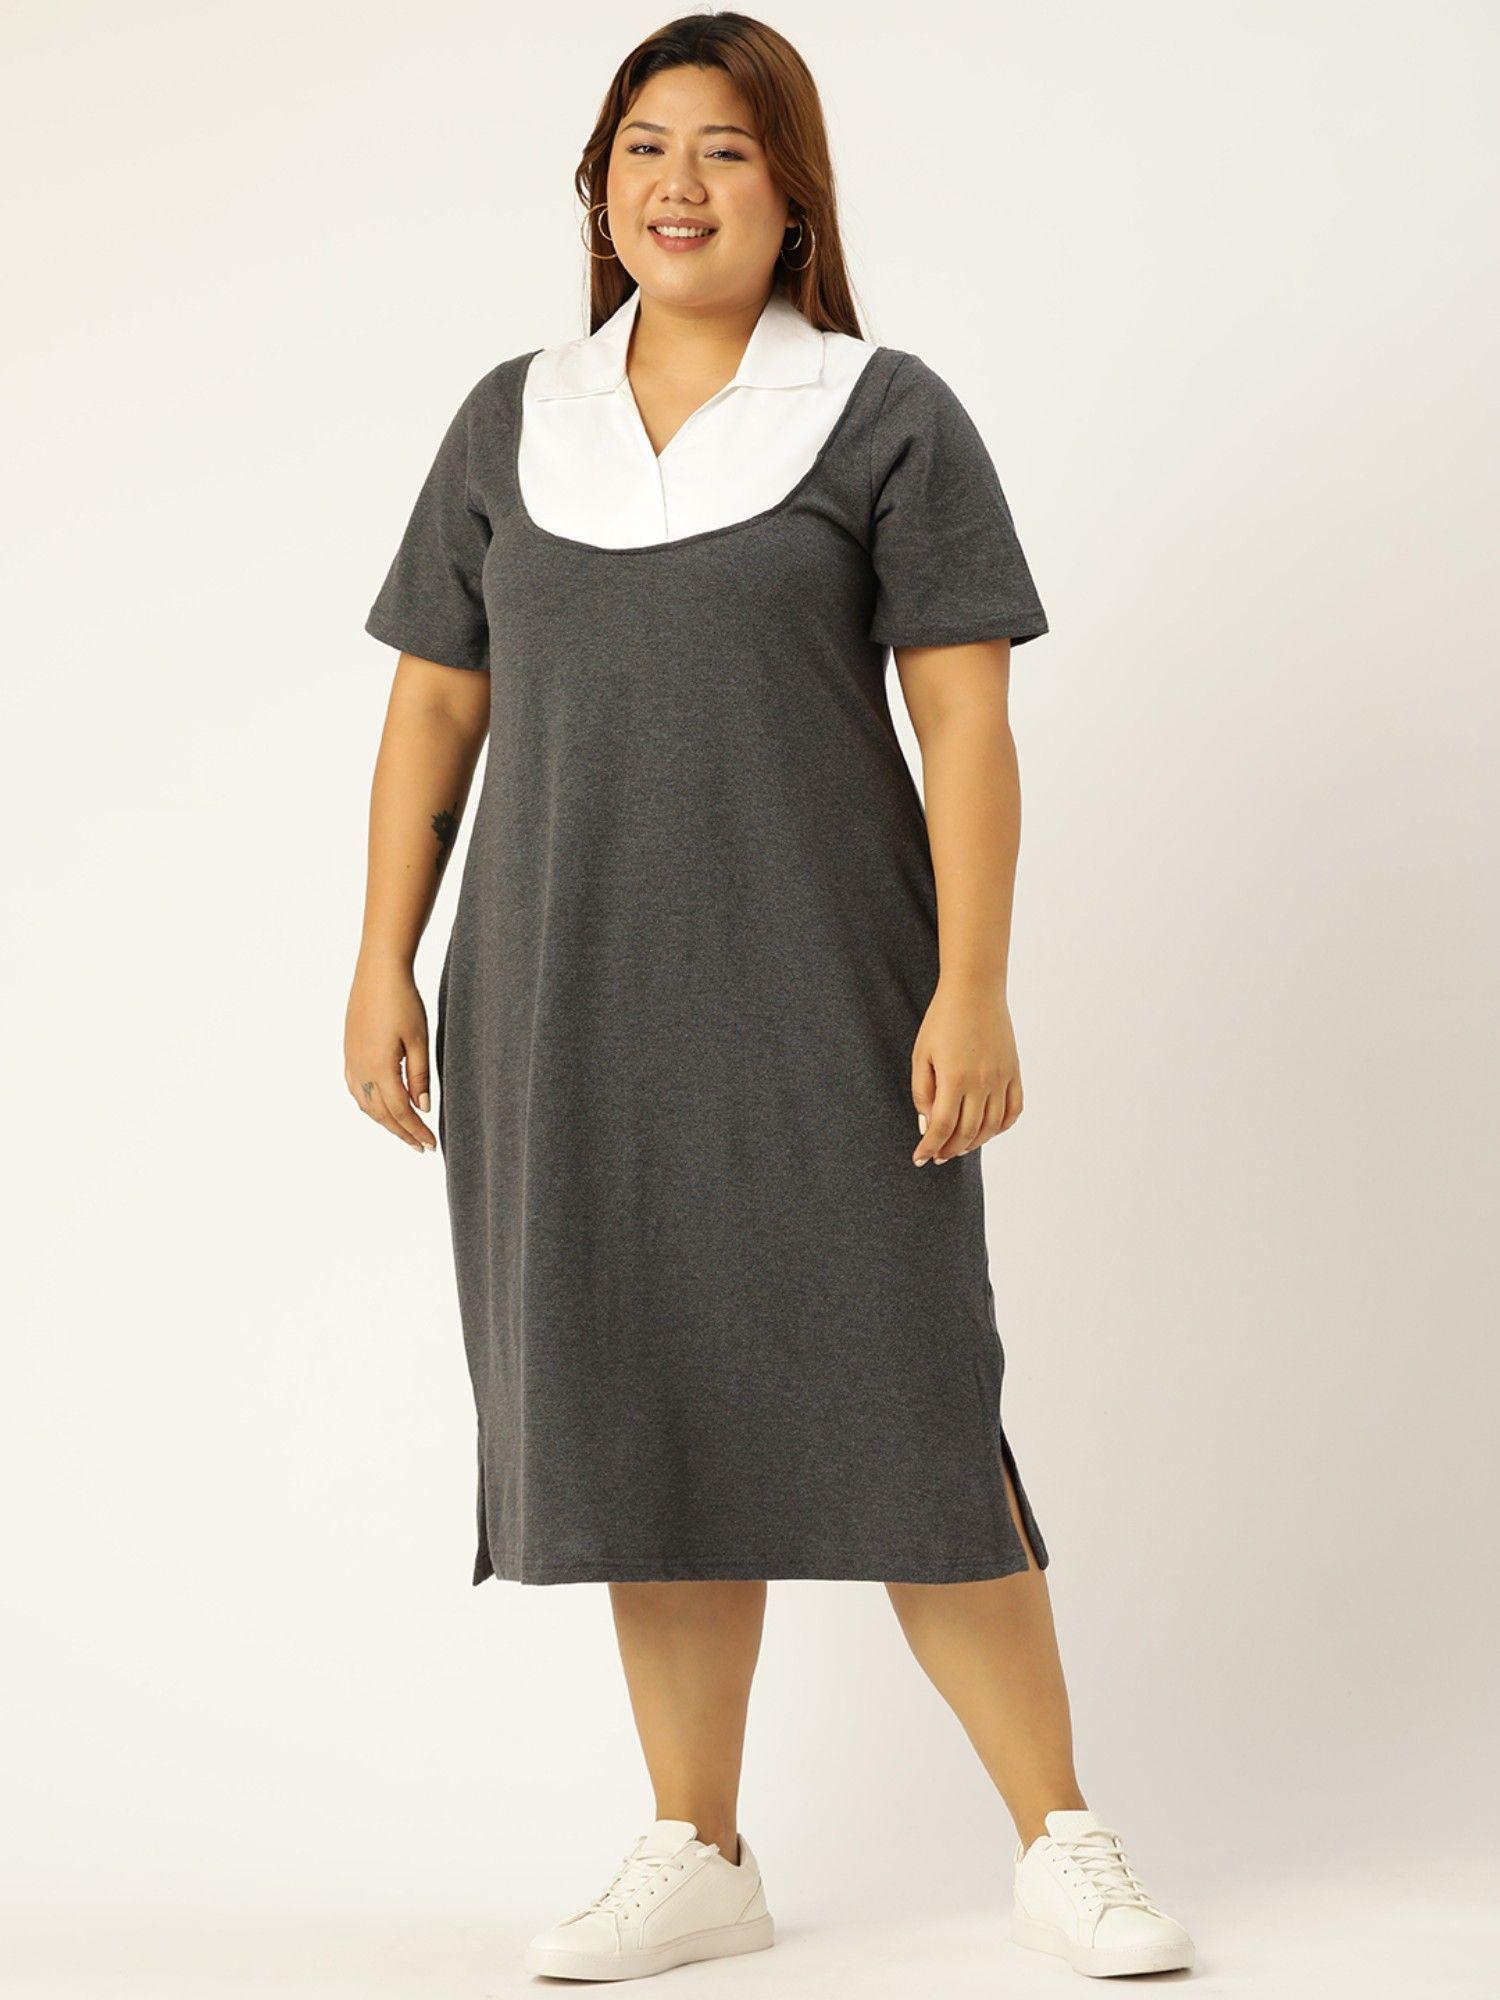 plus-size-women-charcoal-grey-&-white-solid-color-shirt-collar-dress